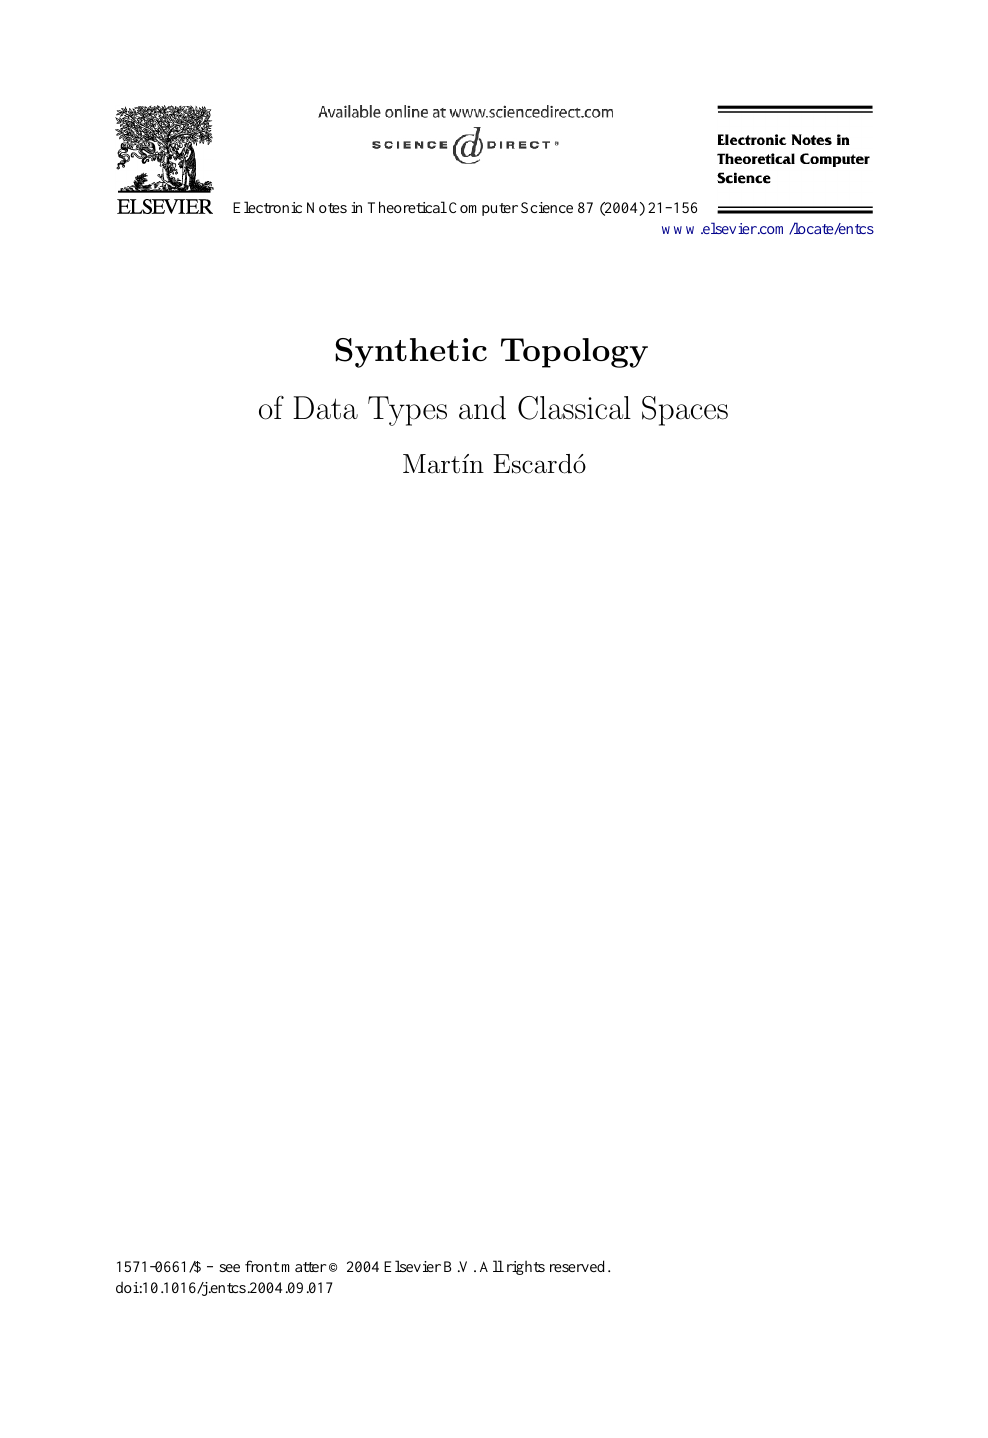 Synthetic Topology Topic Of Research Paper In Mathematics Download Scholarly Article Pdf And Read For Free On Cyberleninka Open Science Hub